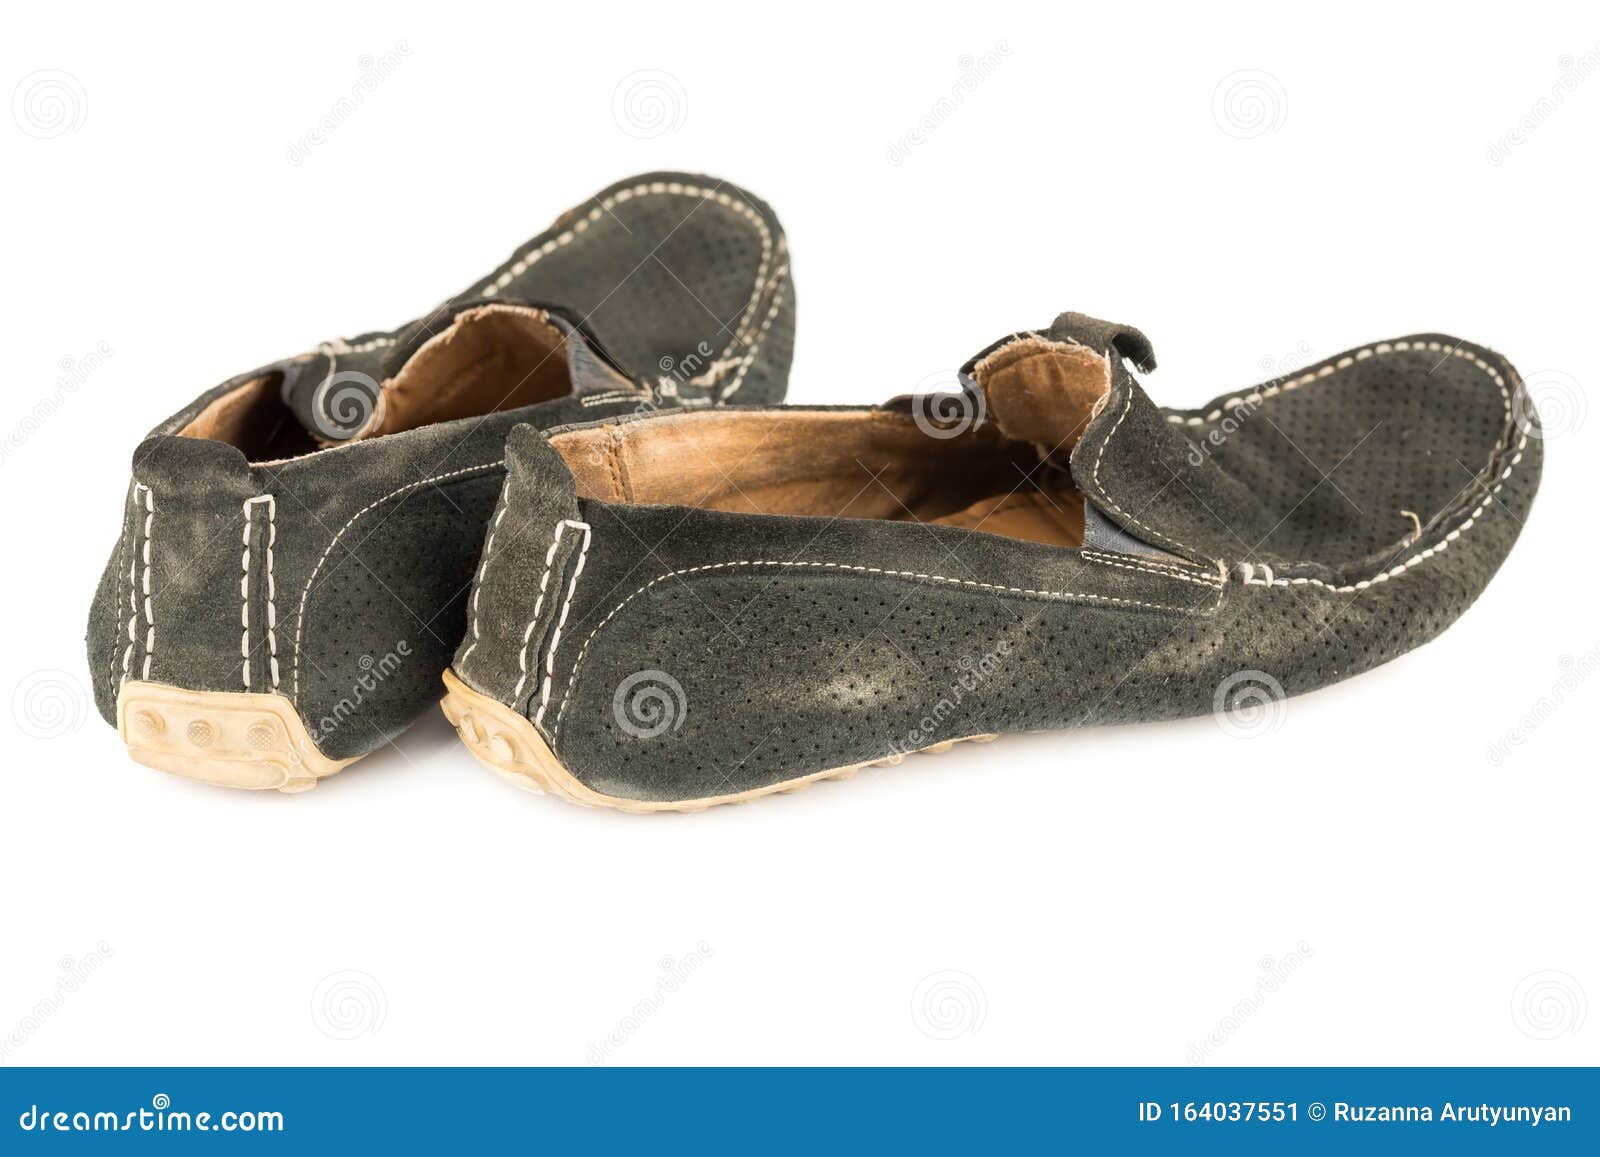 Old moccasins stock image. Image of leather, dirt, grungy - 164037551